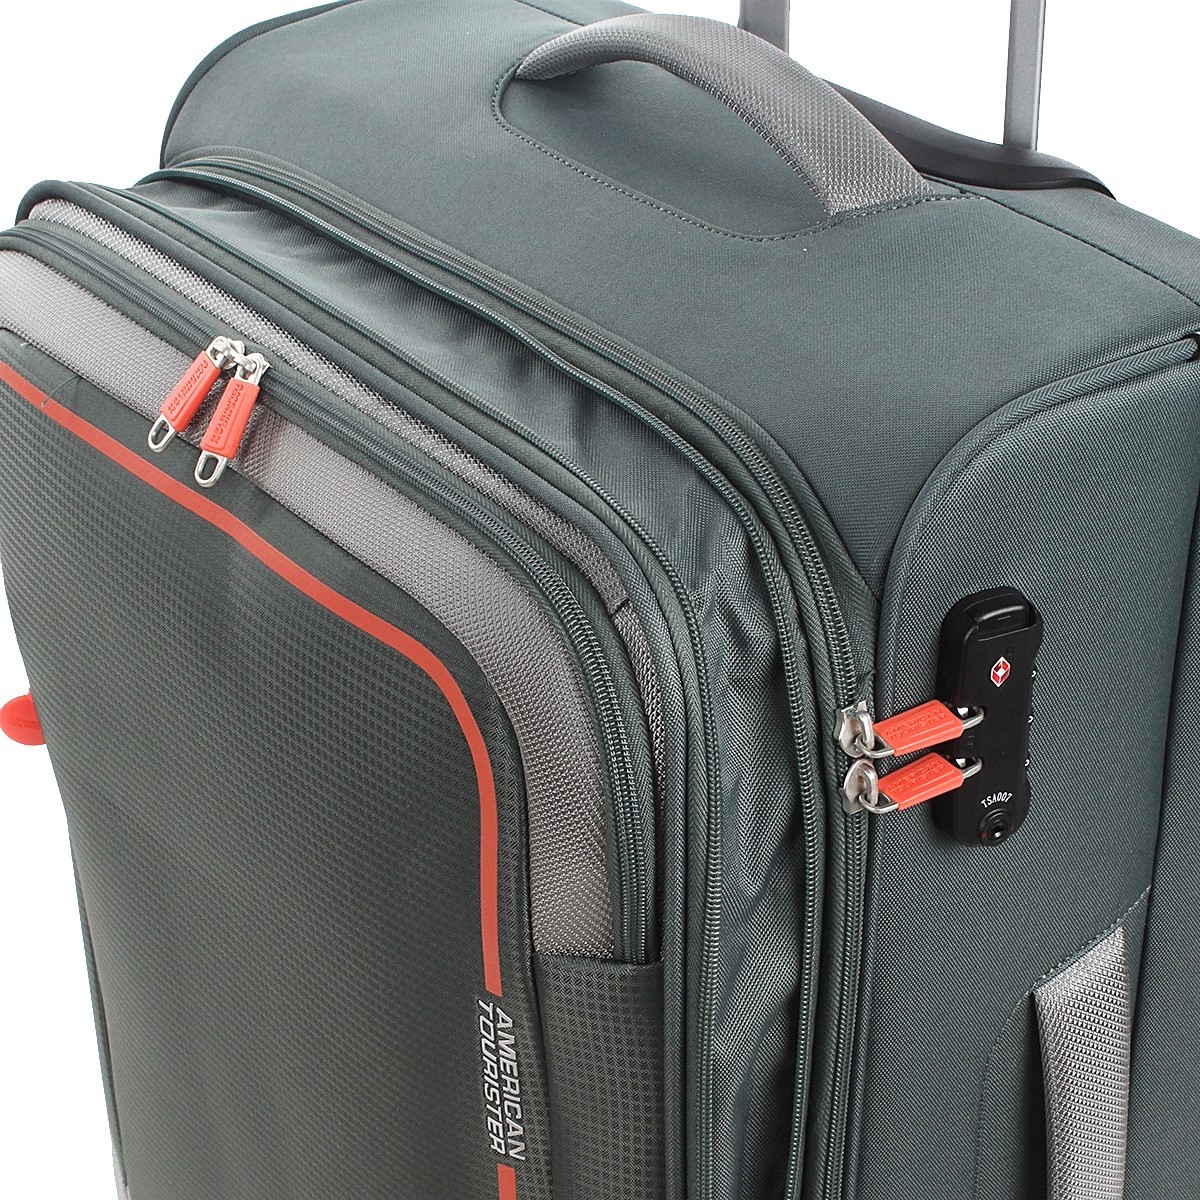 American tourister by samsonite Spinner m 4 ruote Dark forest Pulsonic MD6*04002